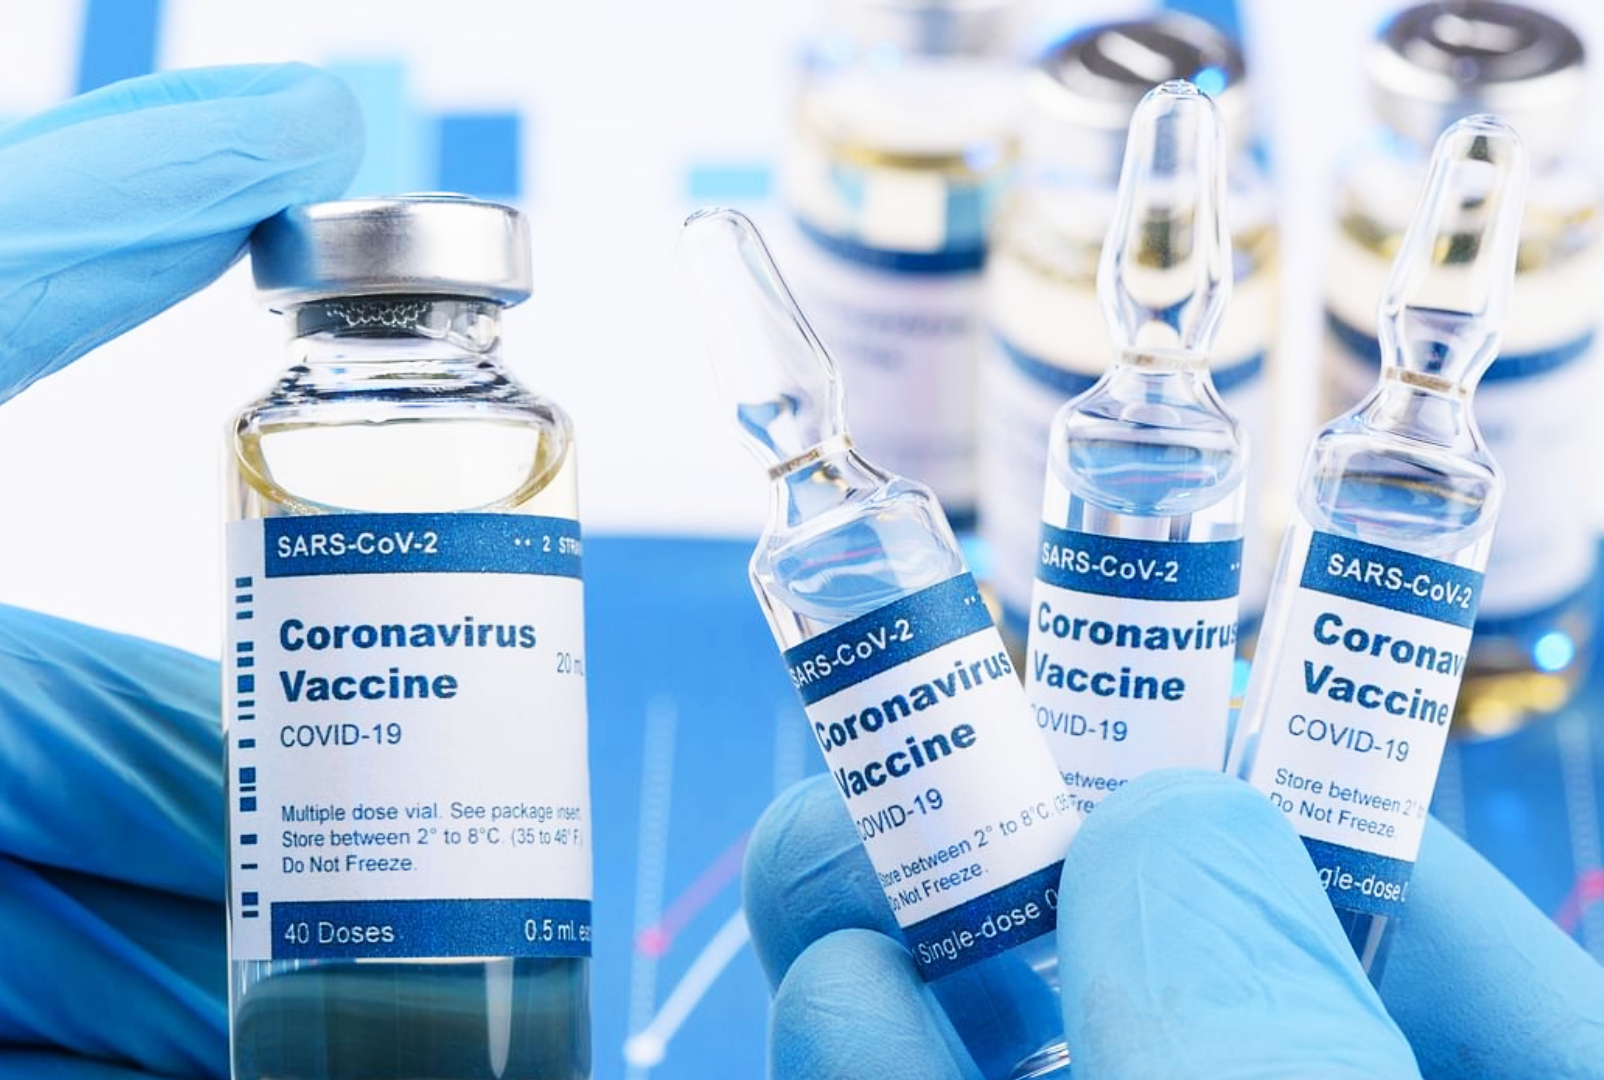 US Moderna COVID-19 Vaccine Offers Antidote For Deep Freeze Problem